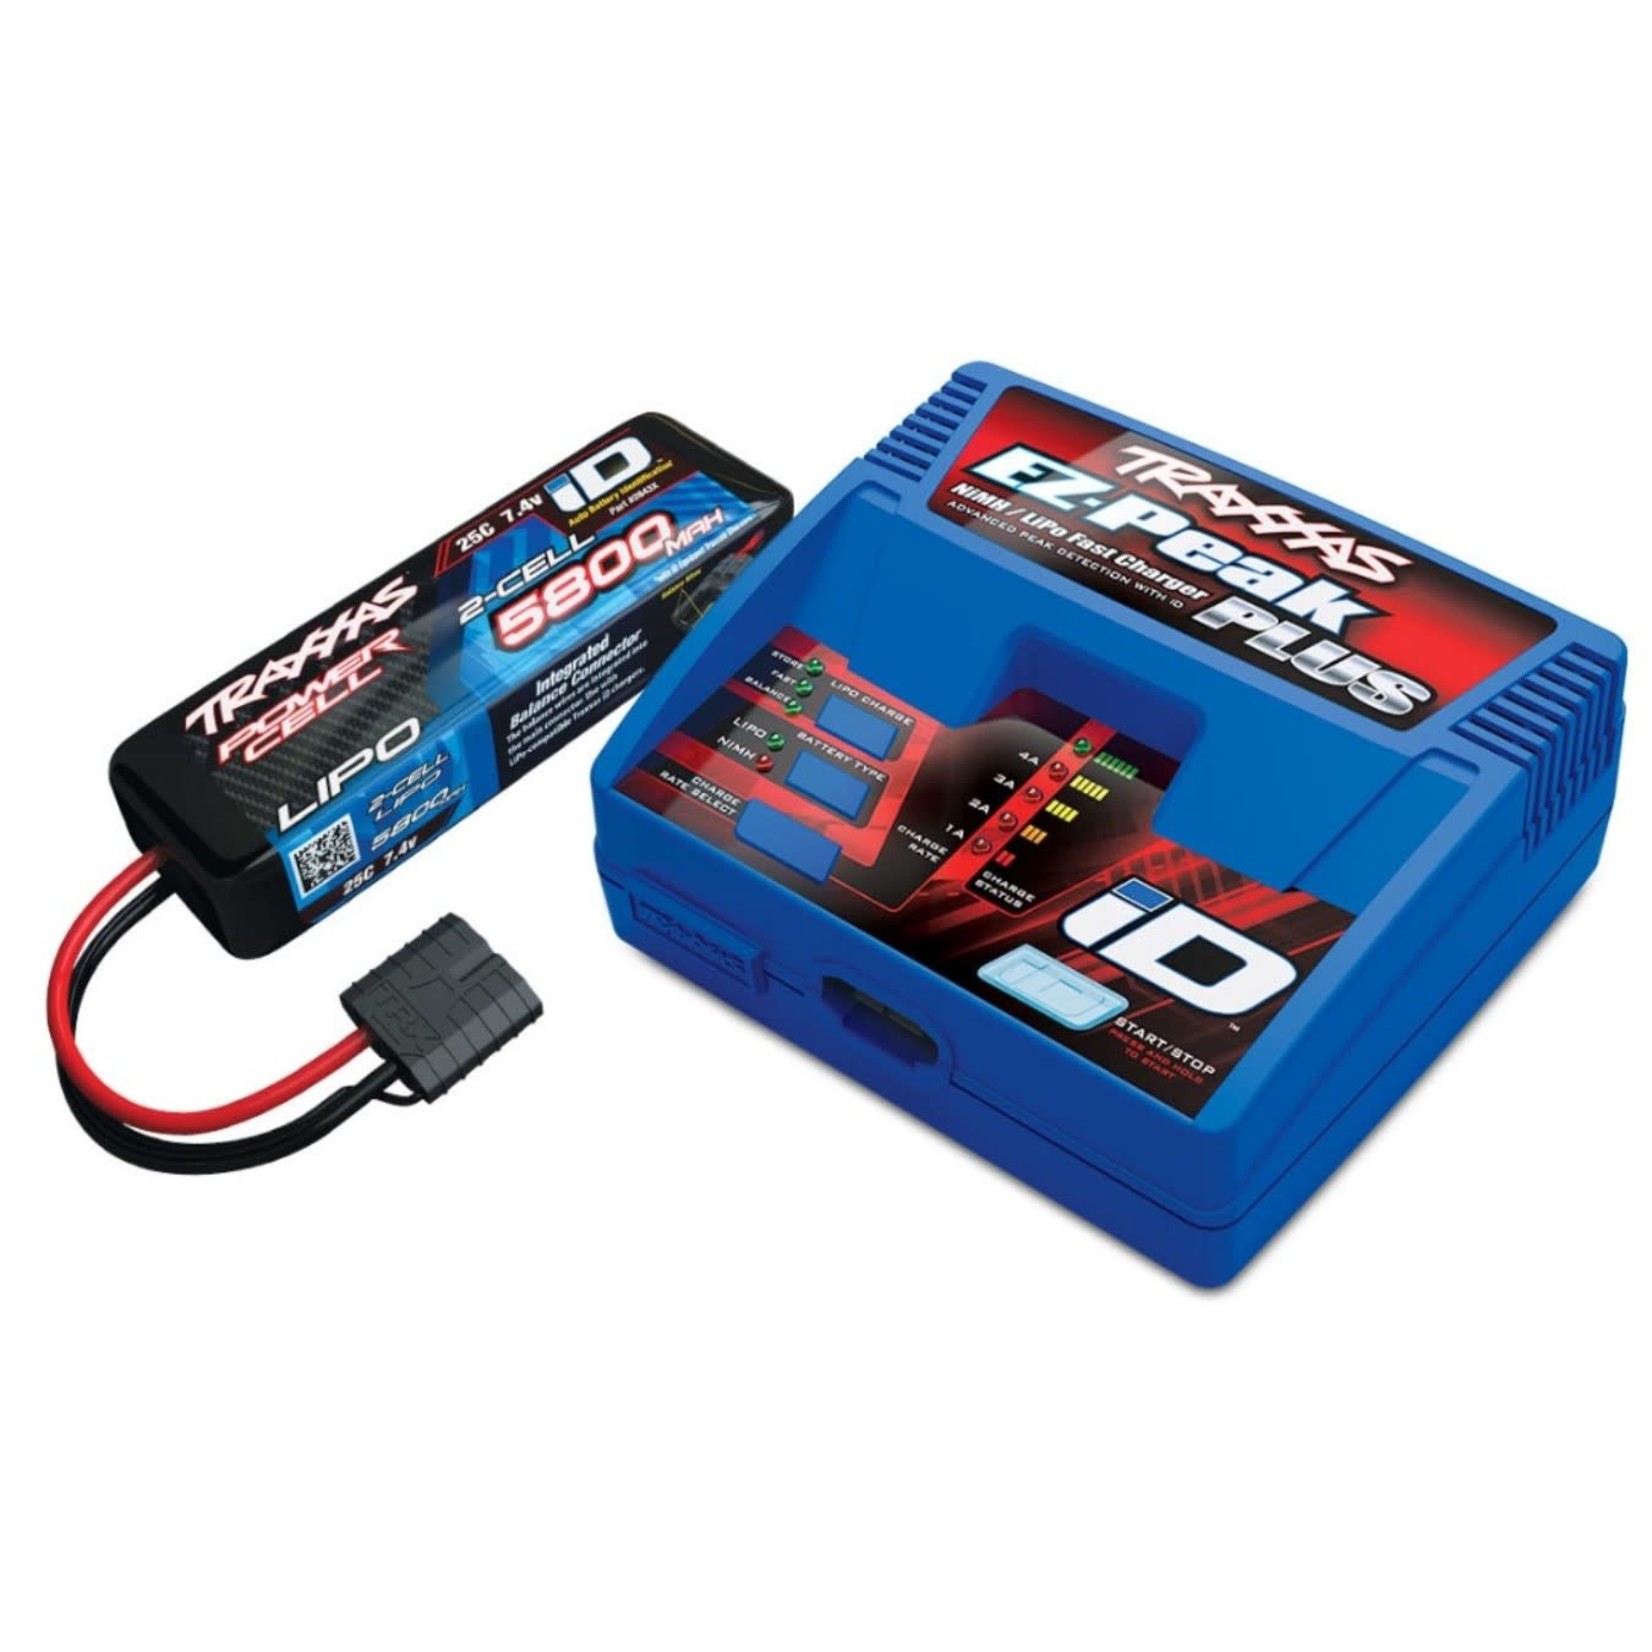 Traxxas EZ-Peak 2S Completer Pack with a 5800mAh LiPo